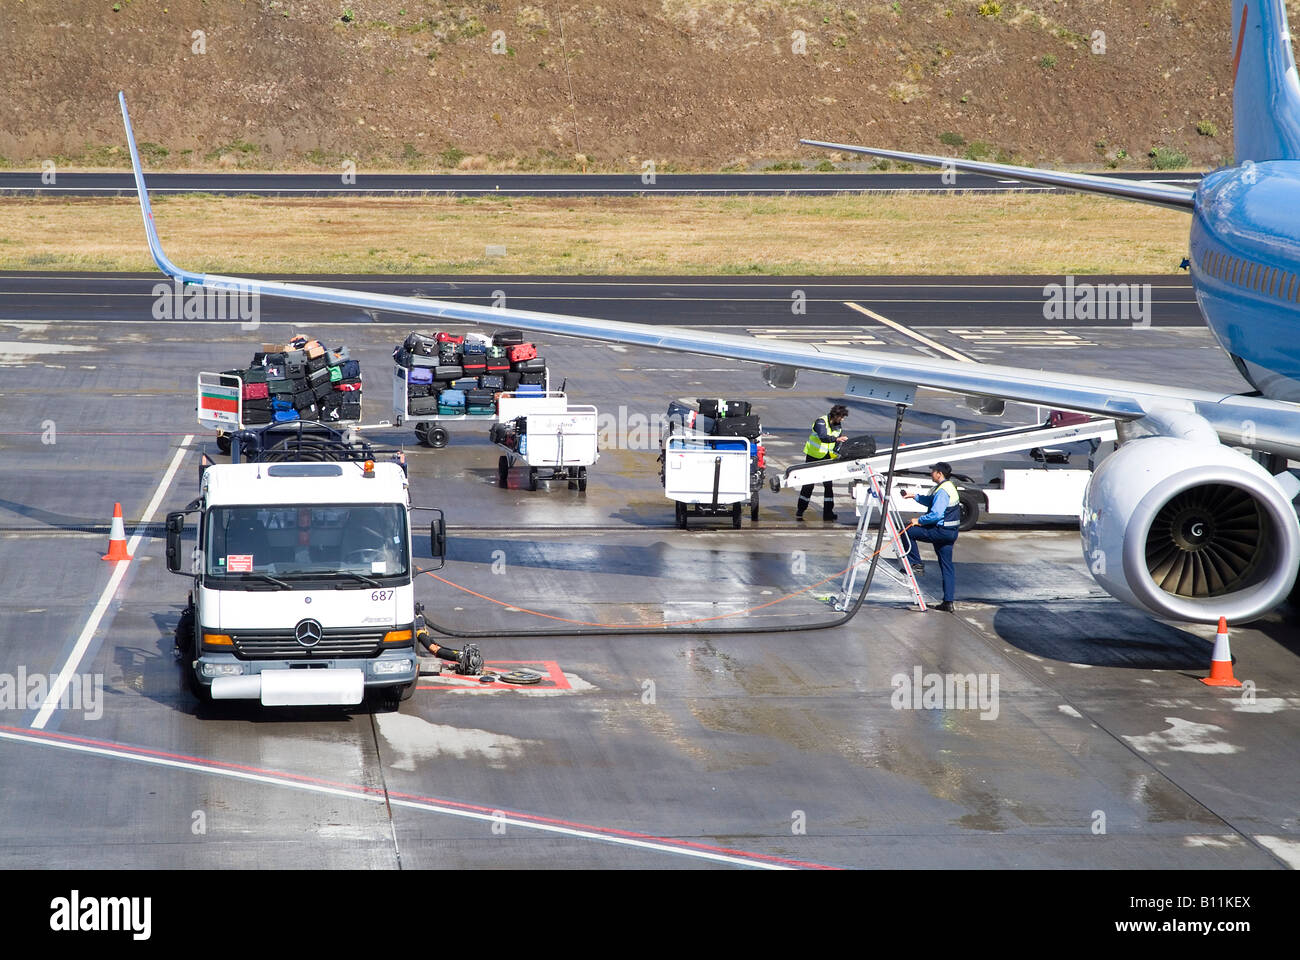 dh Bunker refueling aeroplane FUNCHAL AIRPORT MADEIRA Fueling aircraft bunkering baggage handling plane refuel Stock Photo